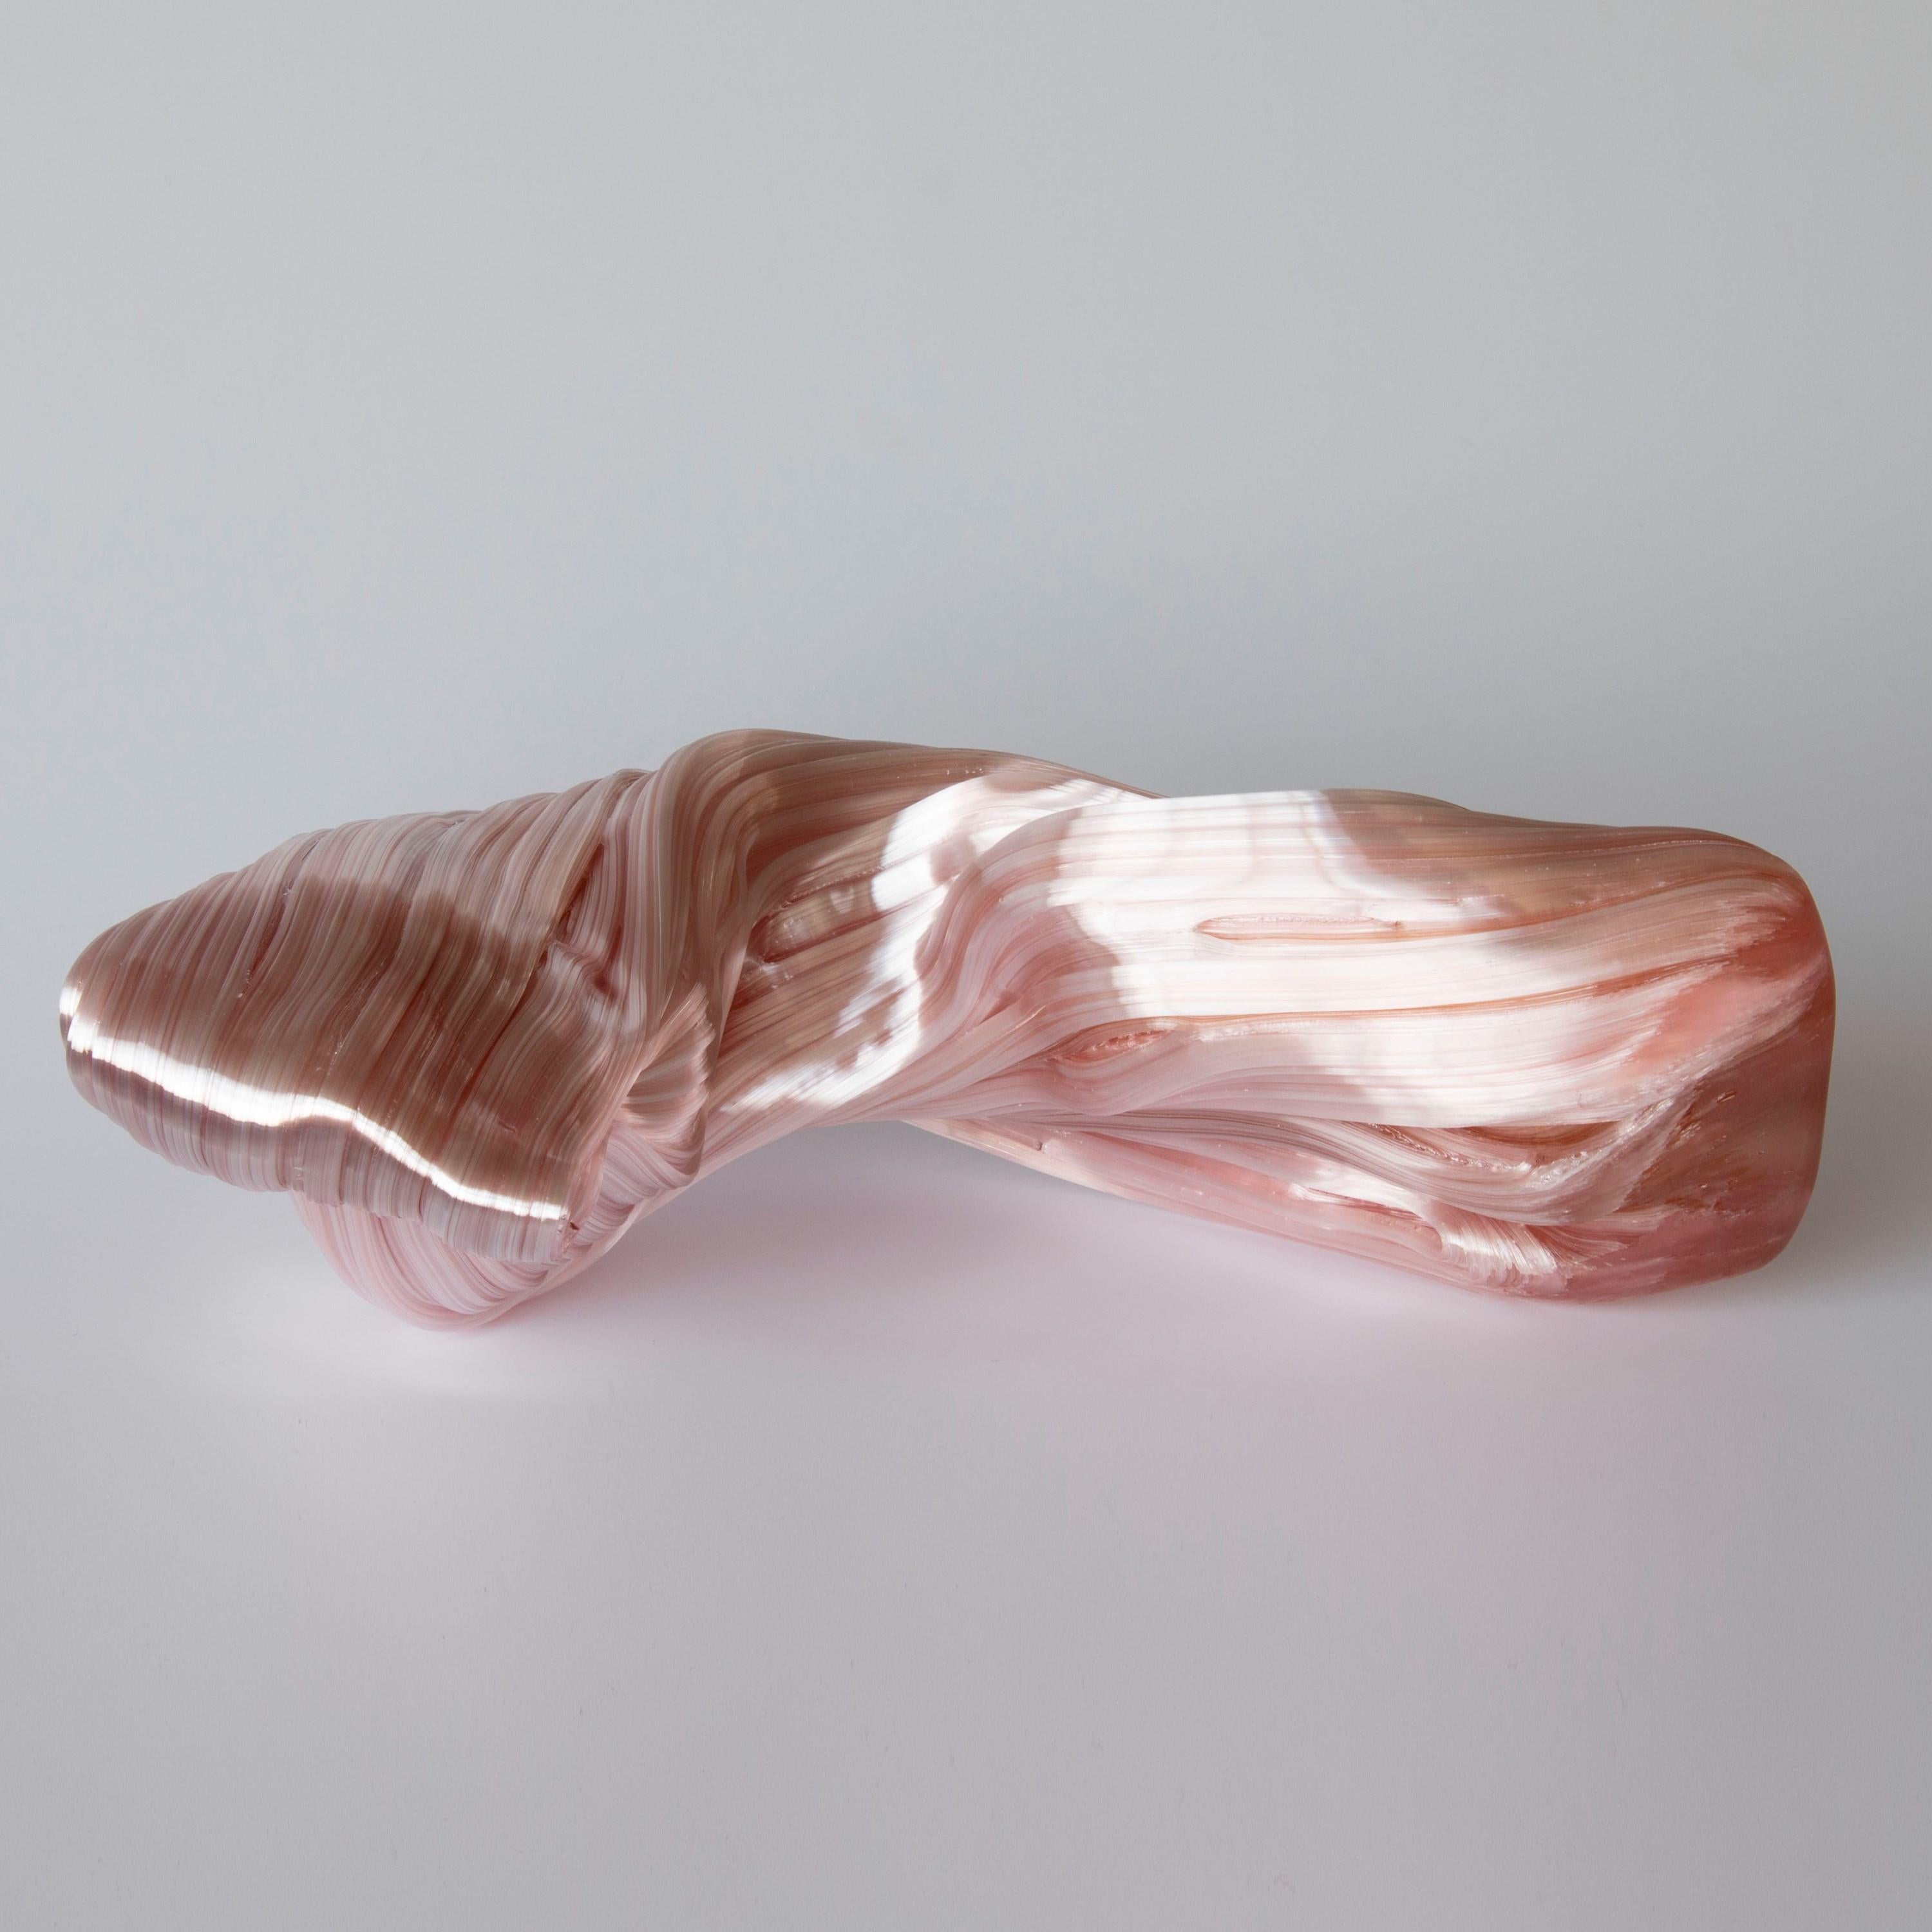 Curve in Coral is a unique soft coral pink glass sculpture by the Danish artist Maria Bang Espersen. With fluid lines and movement, this sculptural artwork is dramatic, elegant yet inspires the inner child with memories of candy canes and sugary